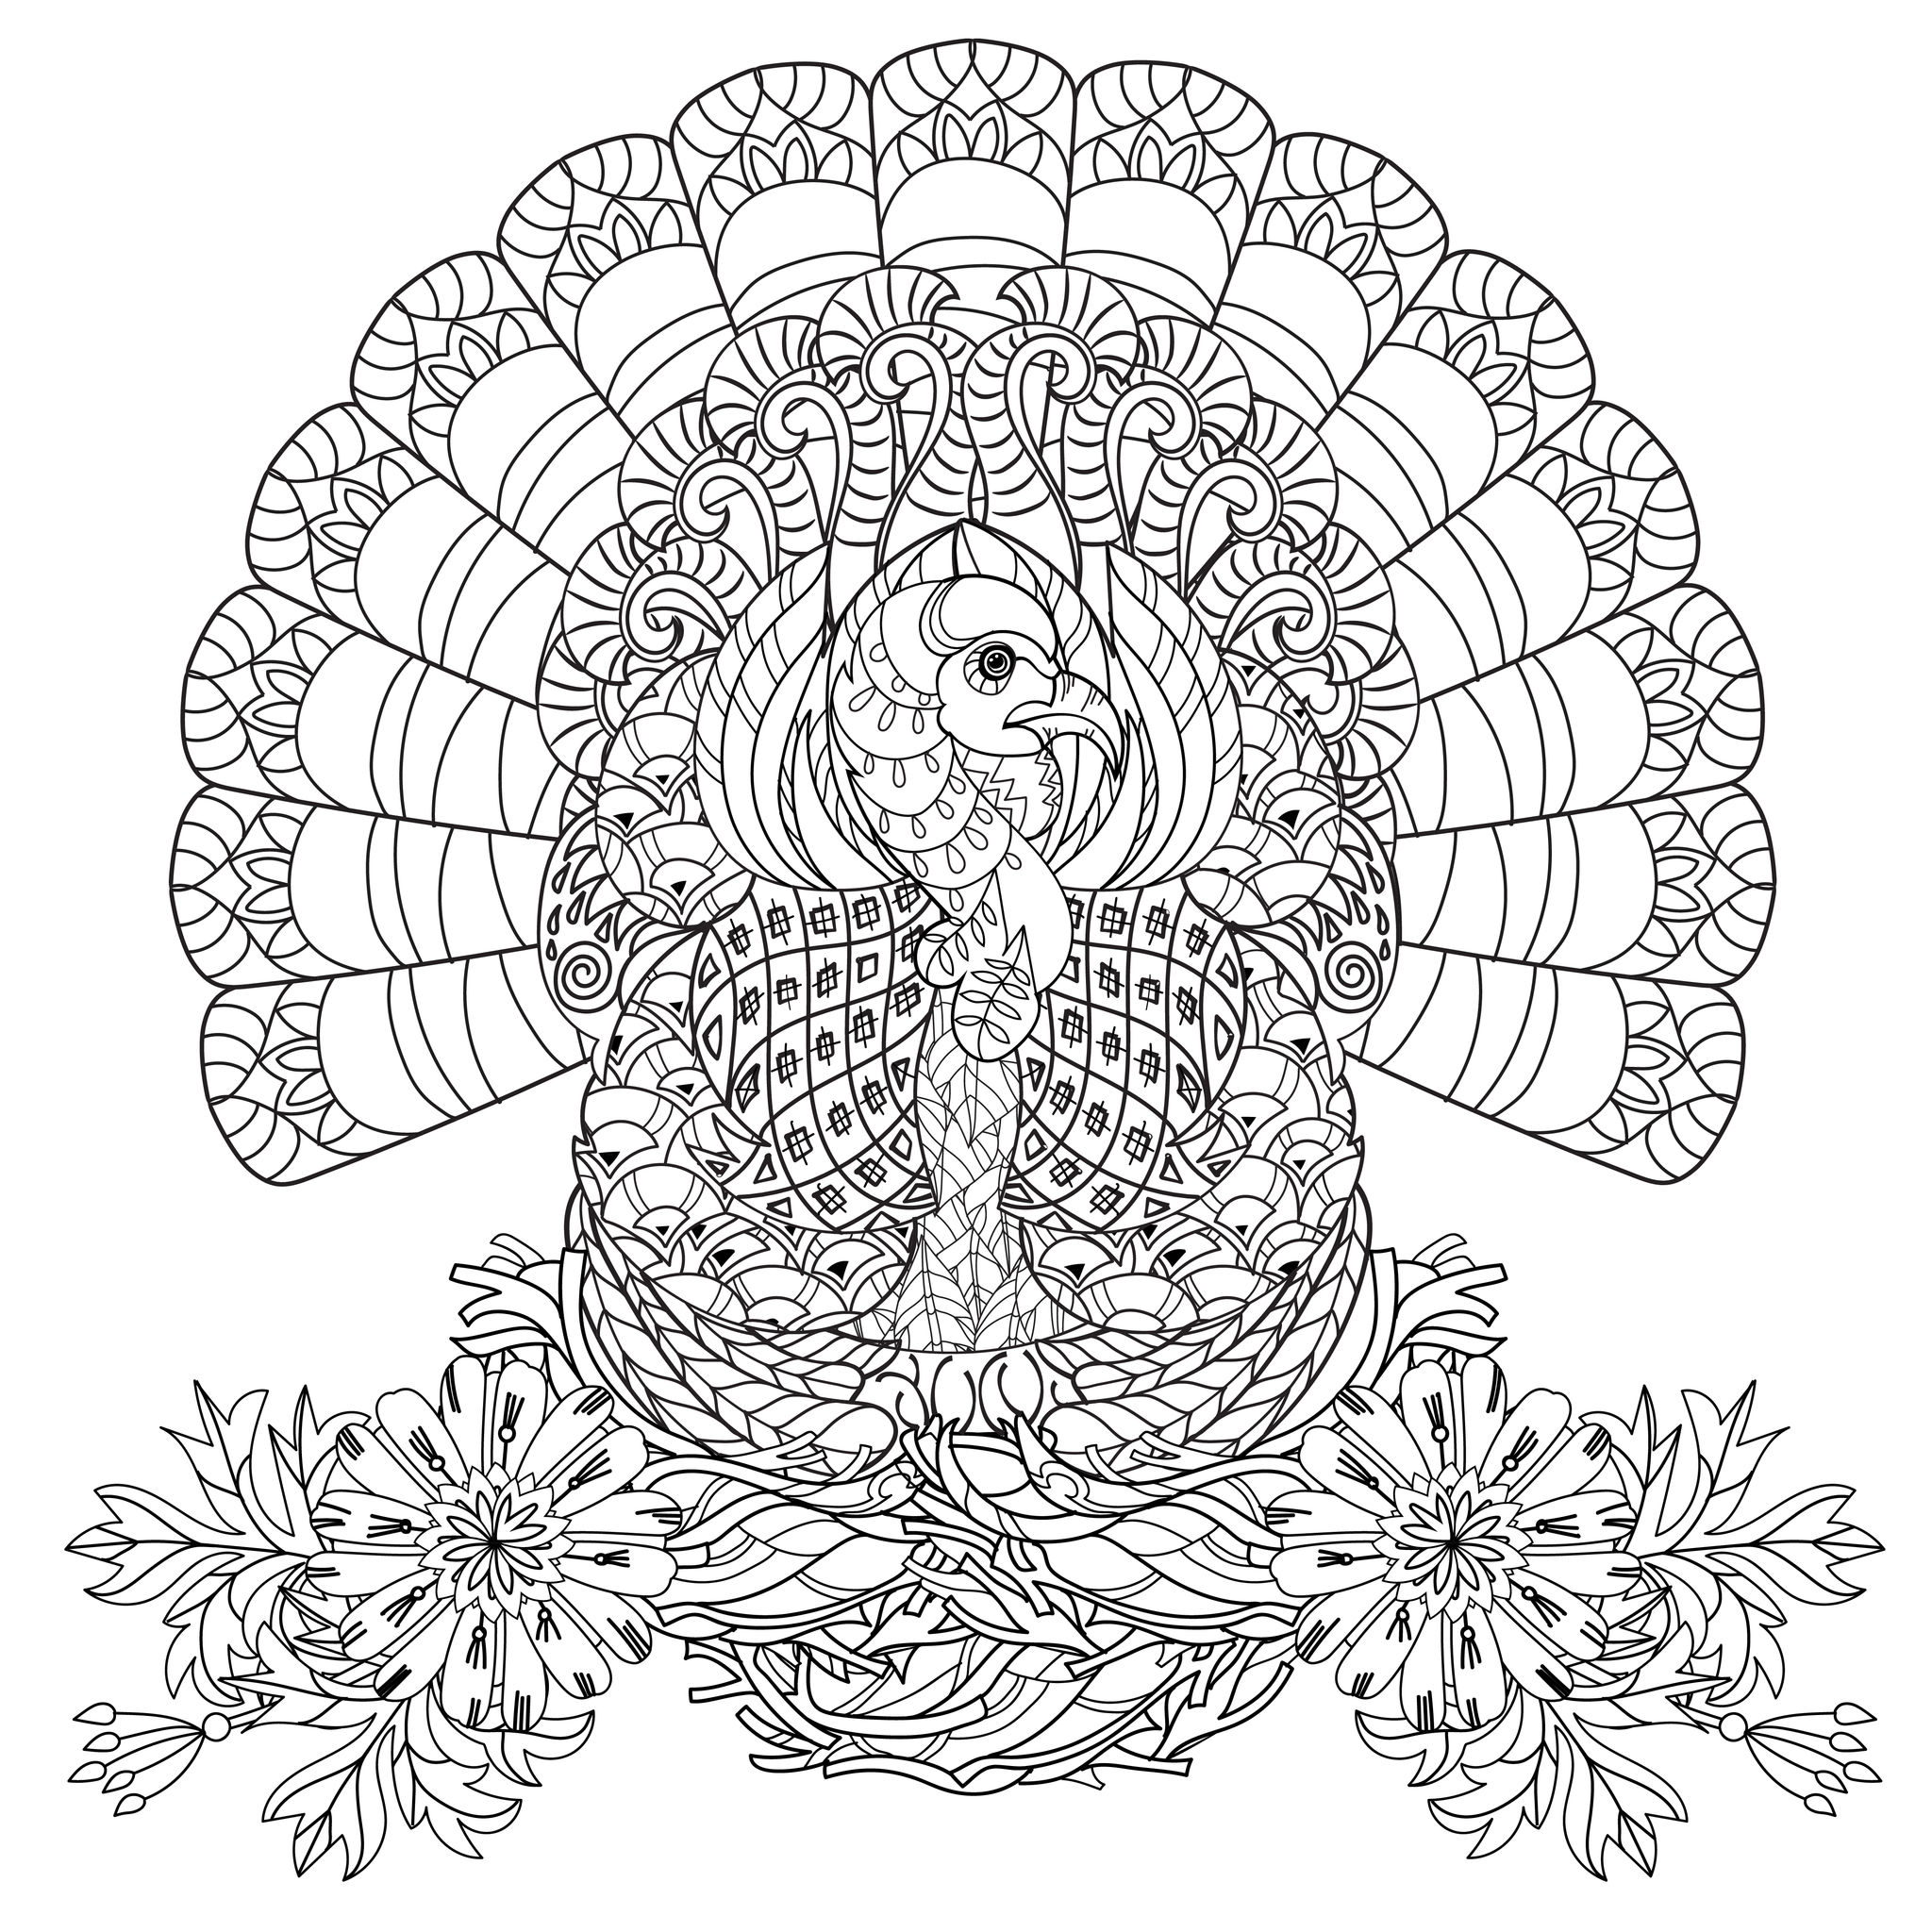 free turkey coloring pages for adults